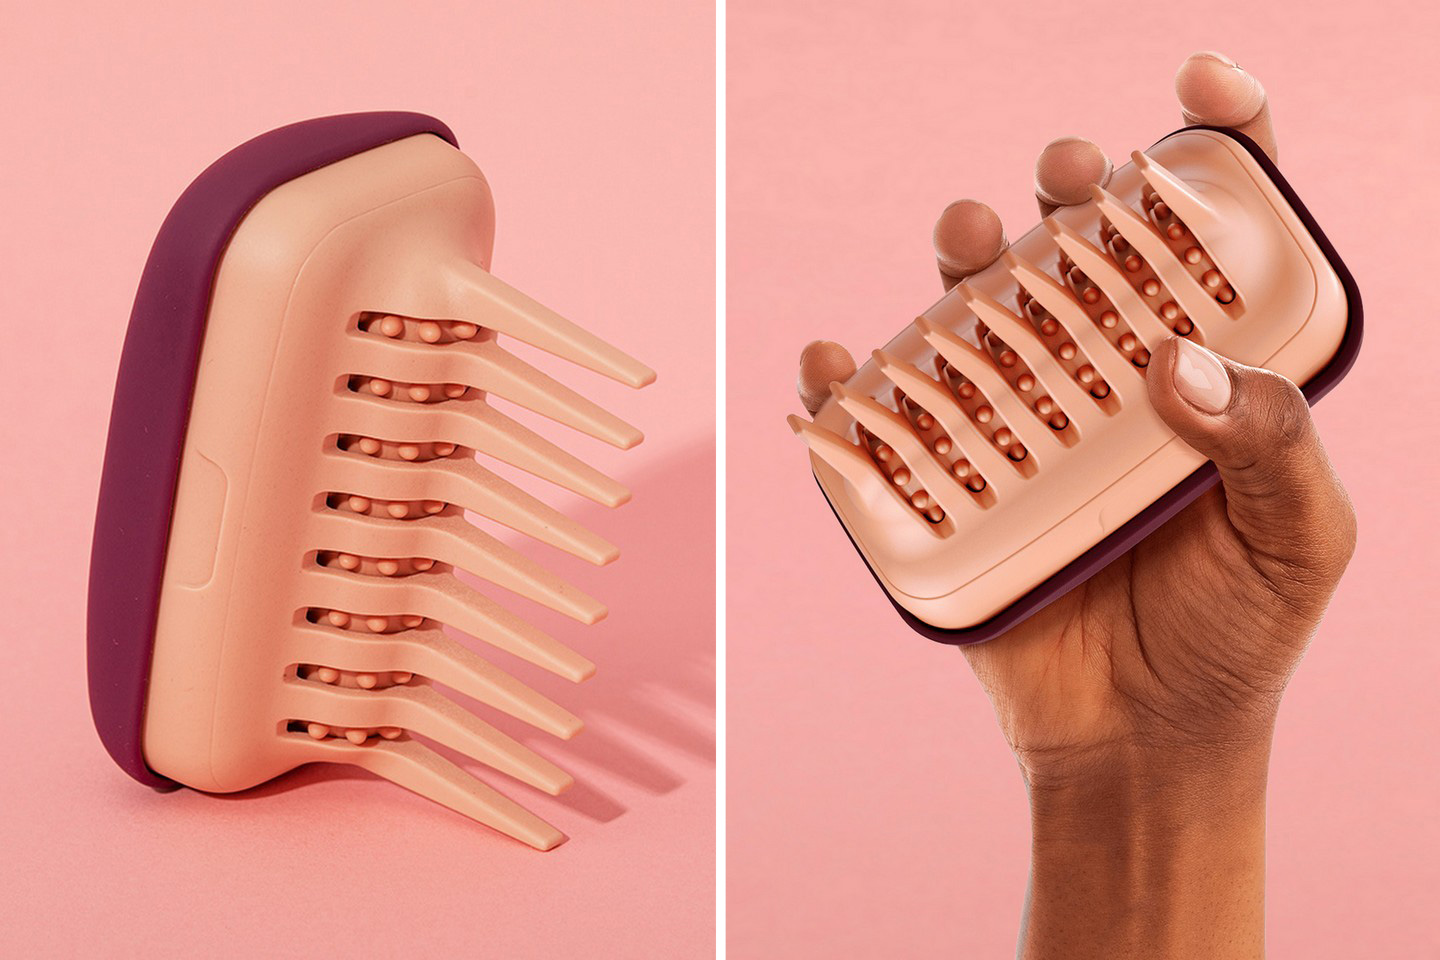 #This ‘rolling hairbrush’ helps detangle extremely frizzy hair while also evenly applying haircare products